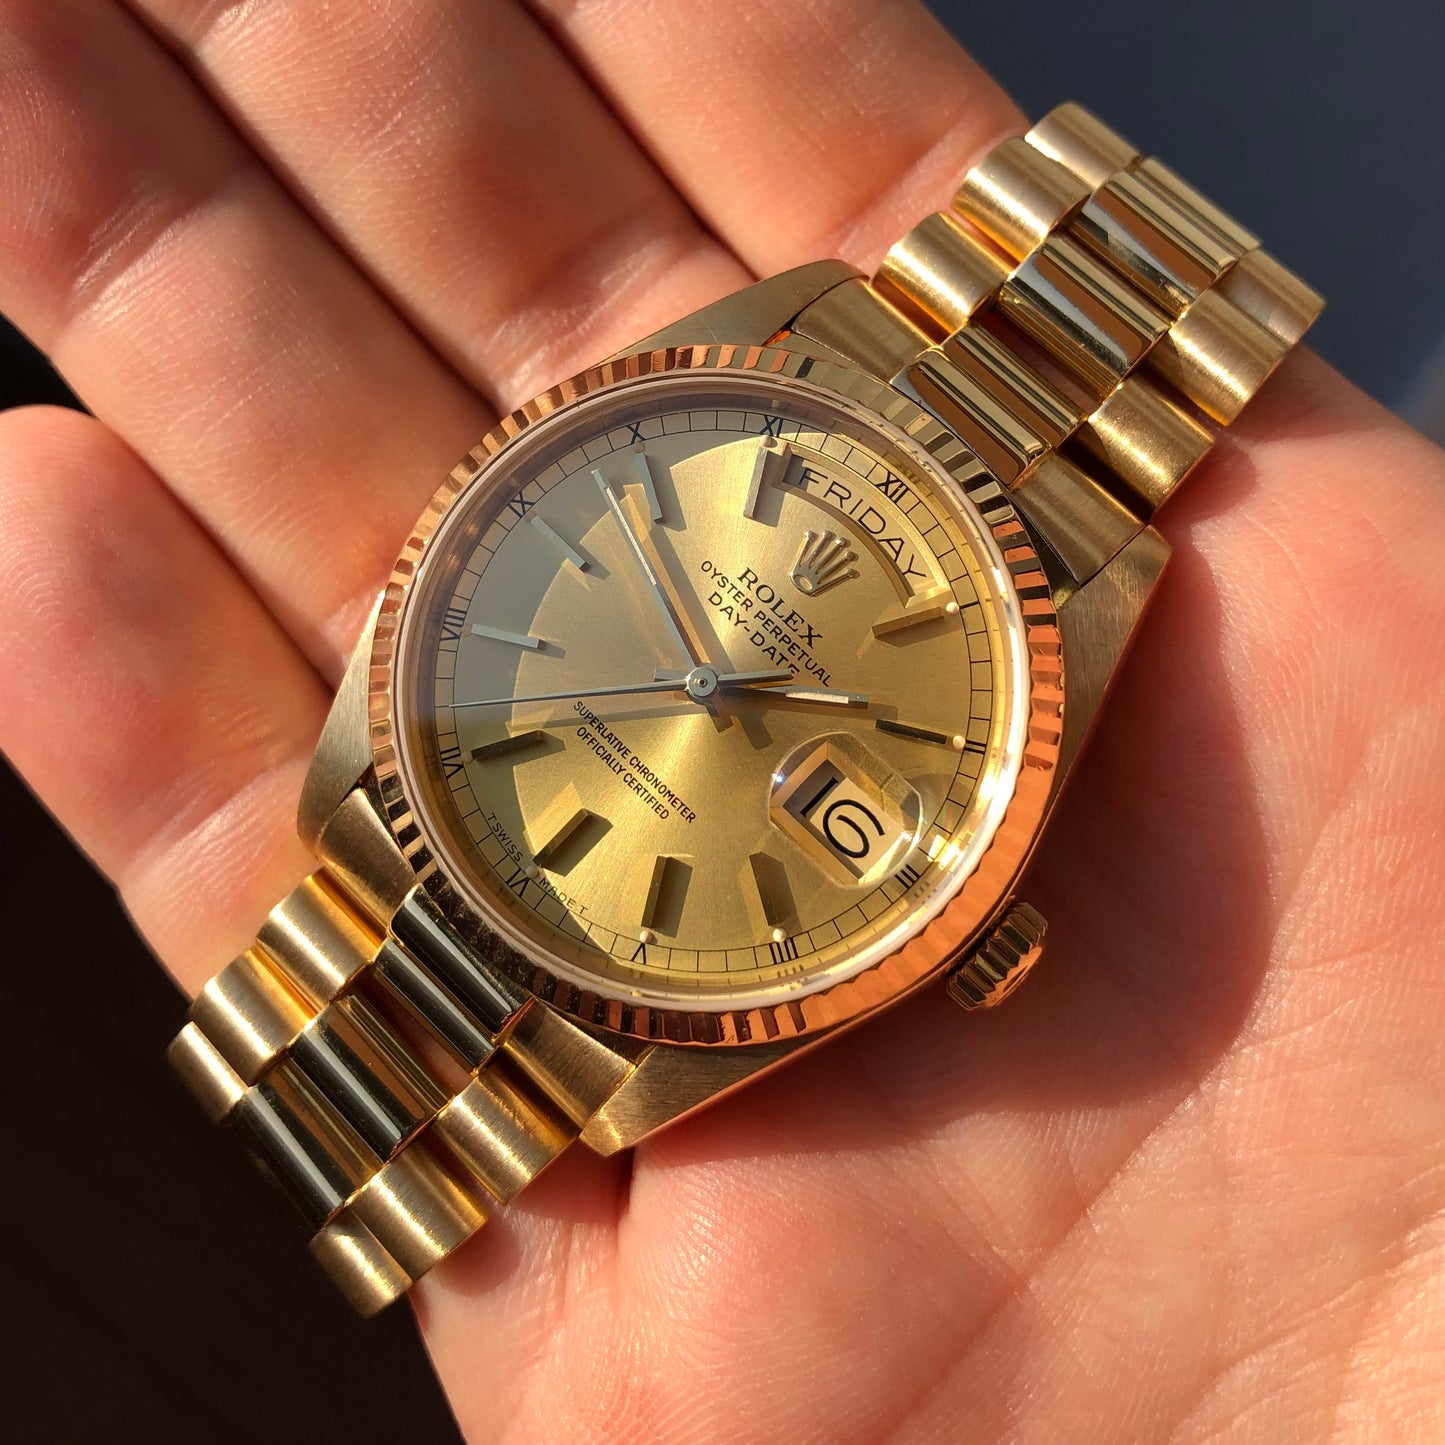 1985 Rolex President 18038 Day Date Yellow Gold Champagne Wristwatch with Papers - Hashtag Watch Company